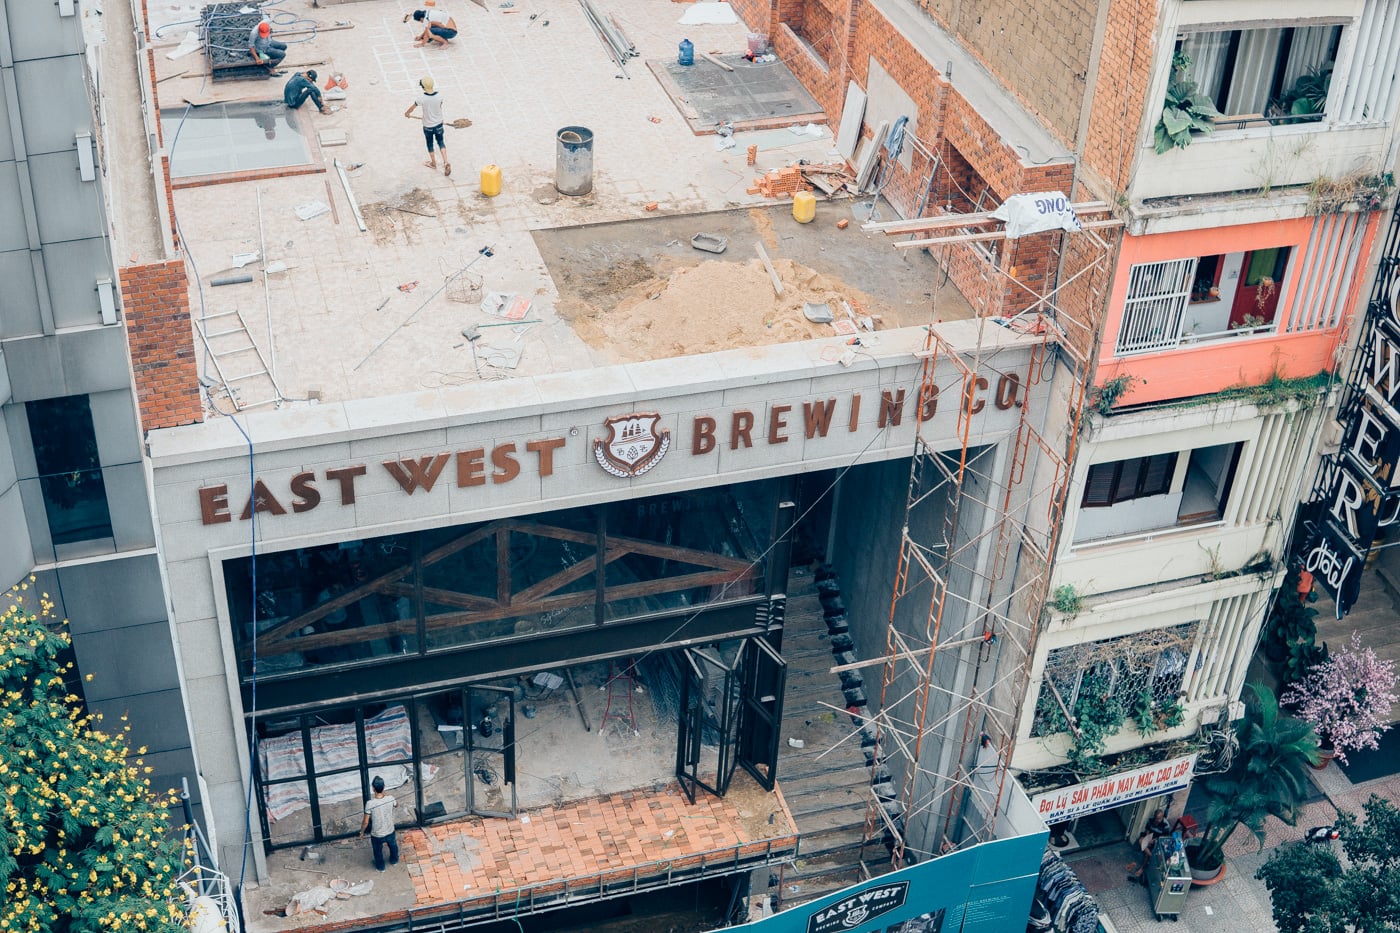 East West Brewing Co